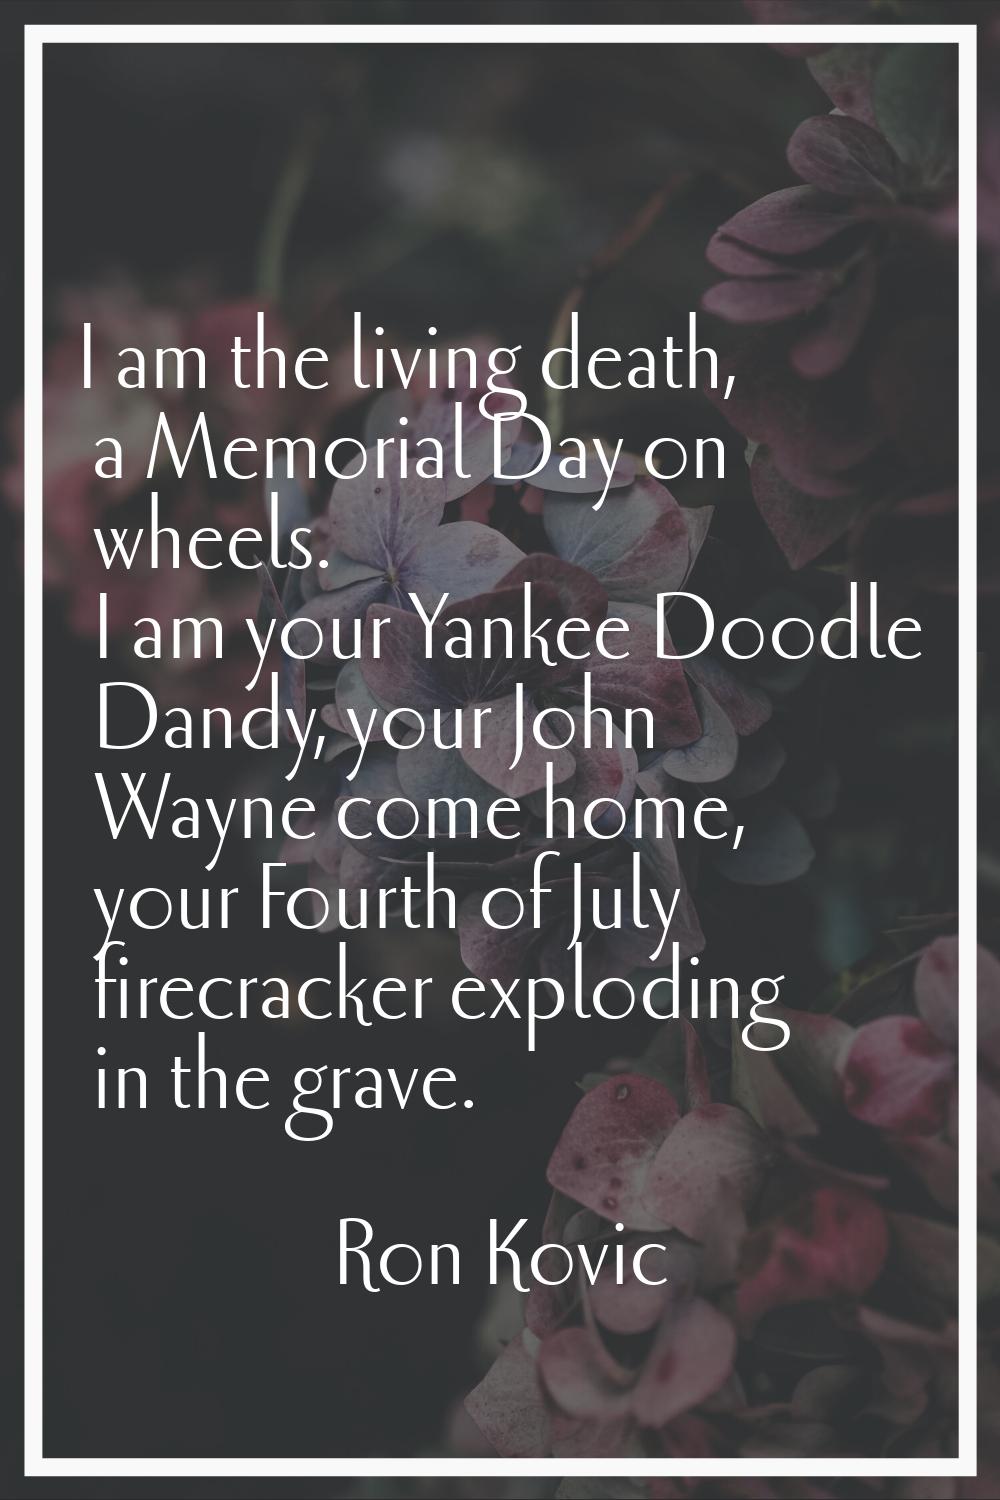 I am the living death, a Memorial Day on wheels. I am your Yankee Doodle Dandy, your John Wayne com